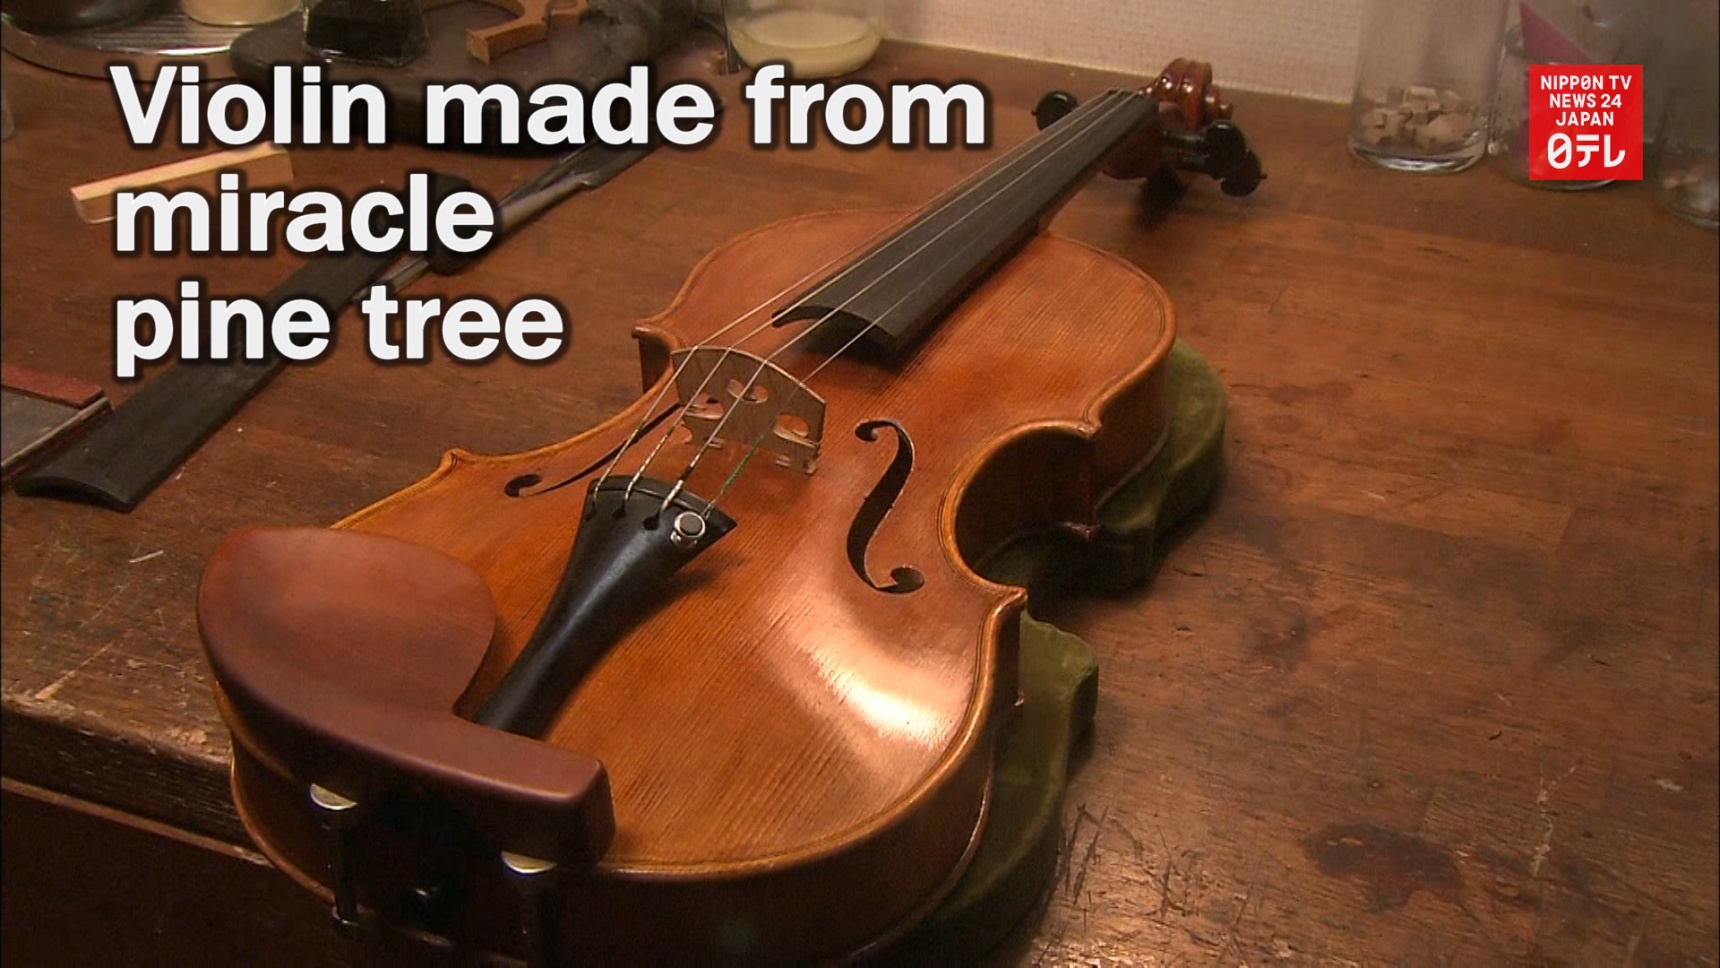 Violin Made from Iwate's 'Miracle Pine Tree'